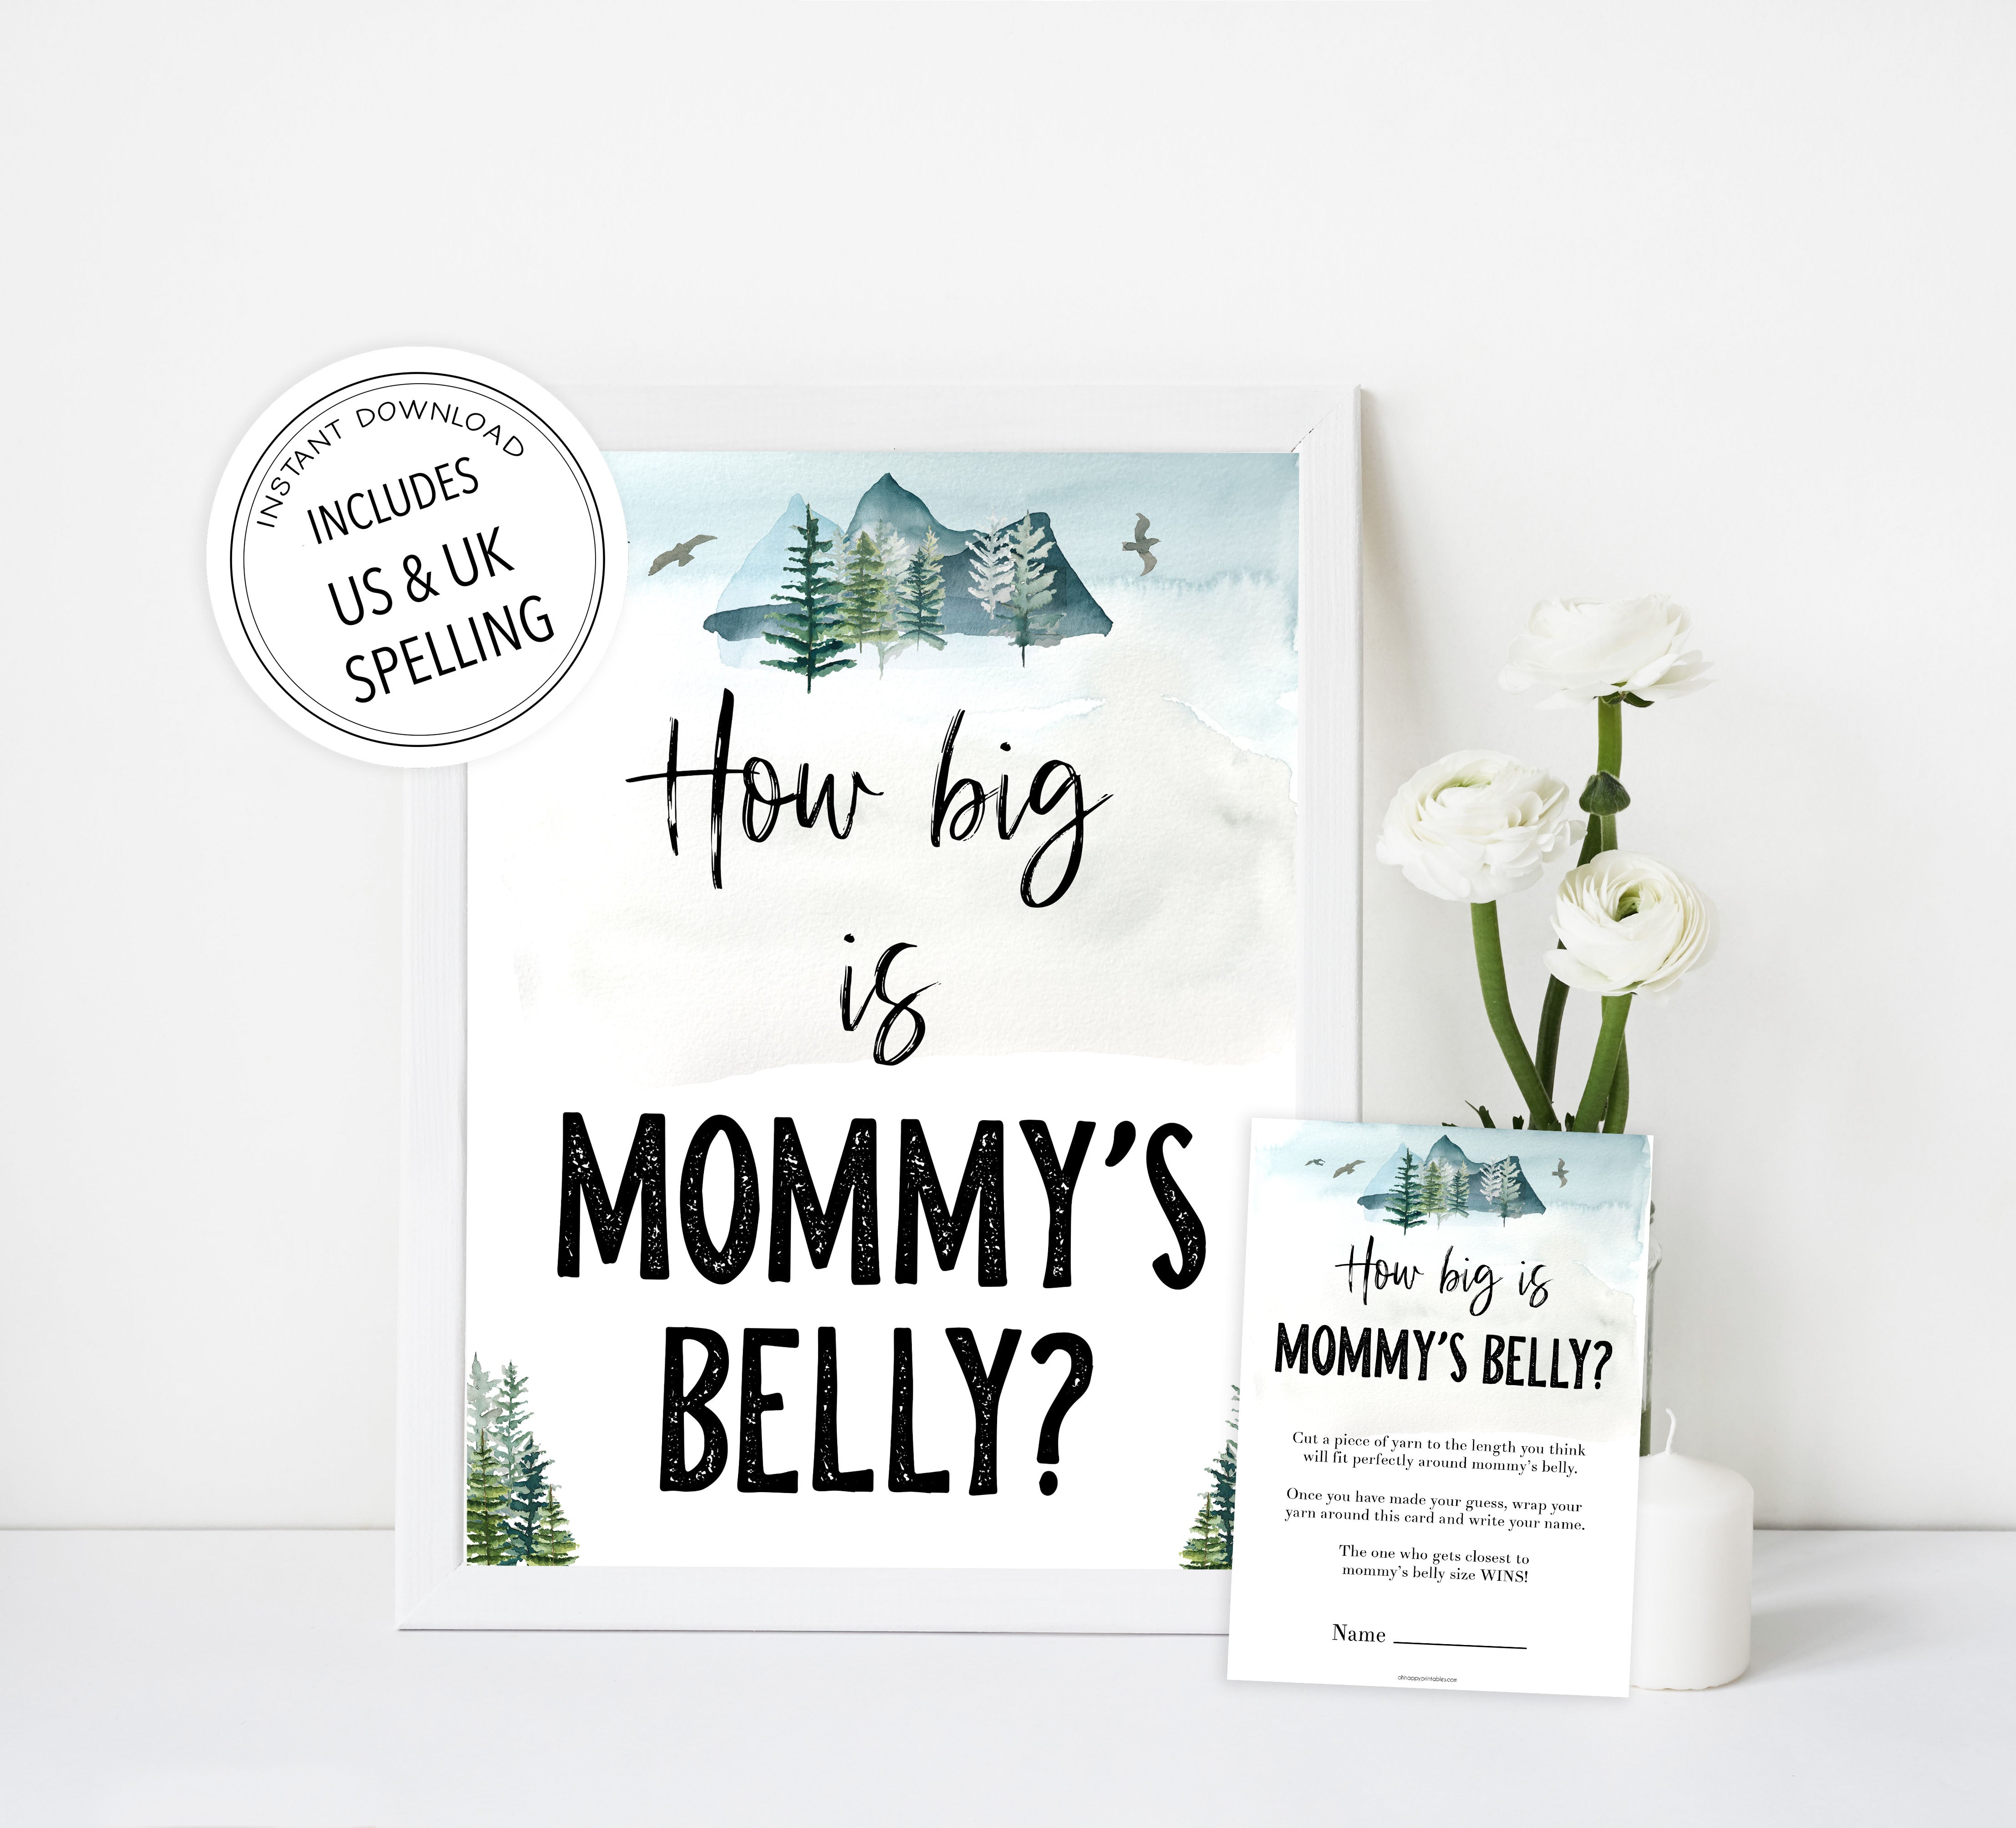 how big is mommys belly game, Printable baby shower games, adventure awaits baby games, baby shower games, fun baby shower ideas, top baby shower ideas, adventure awaits baby shower, baby shower games, fun adventure baby shower ideas